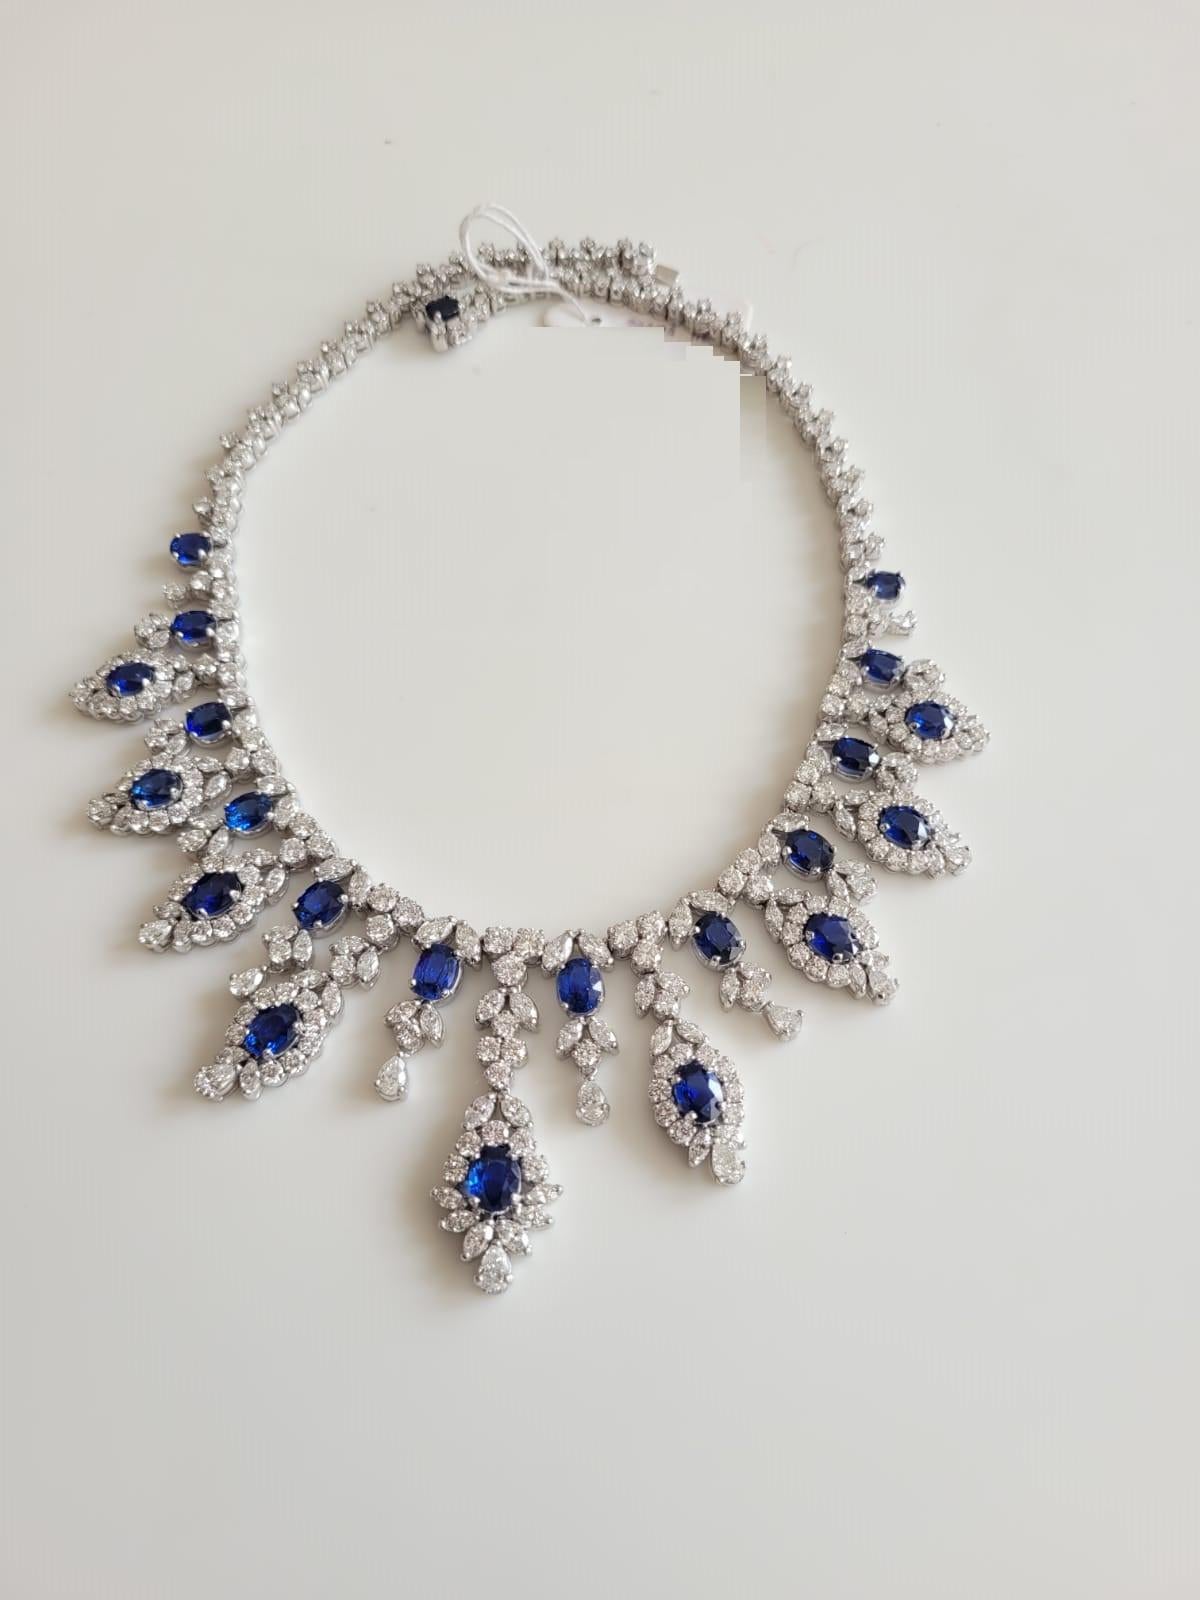 A Rare 18KT White Gold Estate Ceylon Sapphire Diamond Necklace. Necklace is comprised of Finely Set Glittering Gorgeous Ceylon Sapphire Necklace and adorned with Sparkling Round Diamonds!! T.C.W. approx 52CTS!!! Original Price $250,000.00 and comes